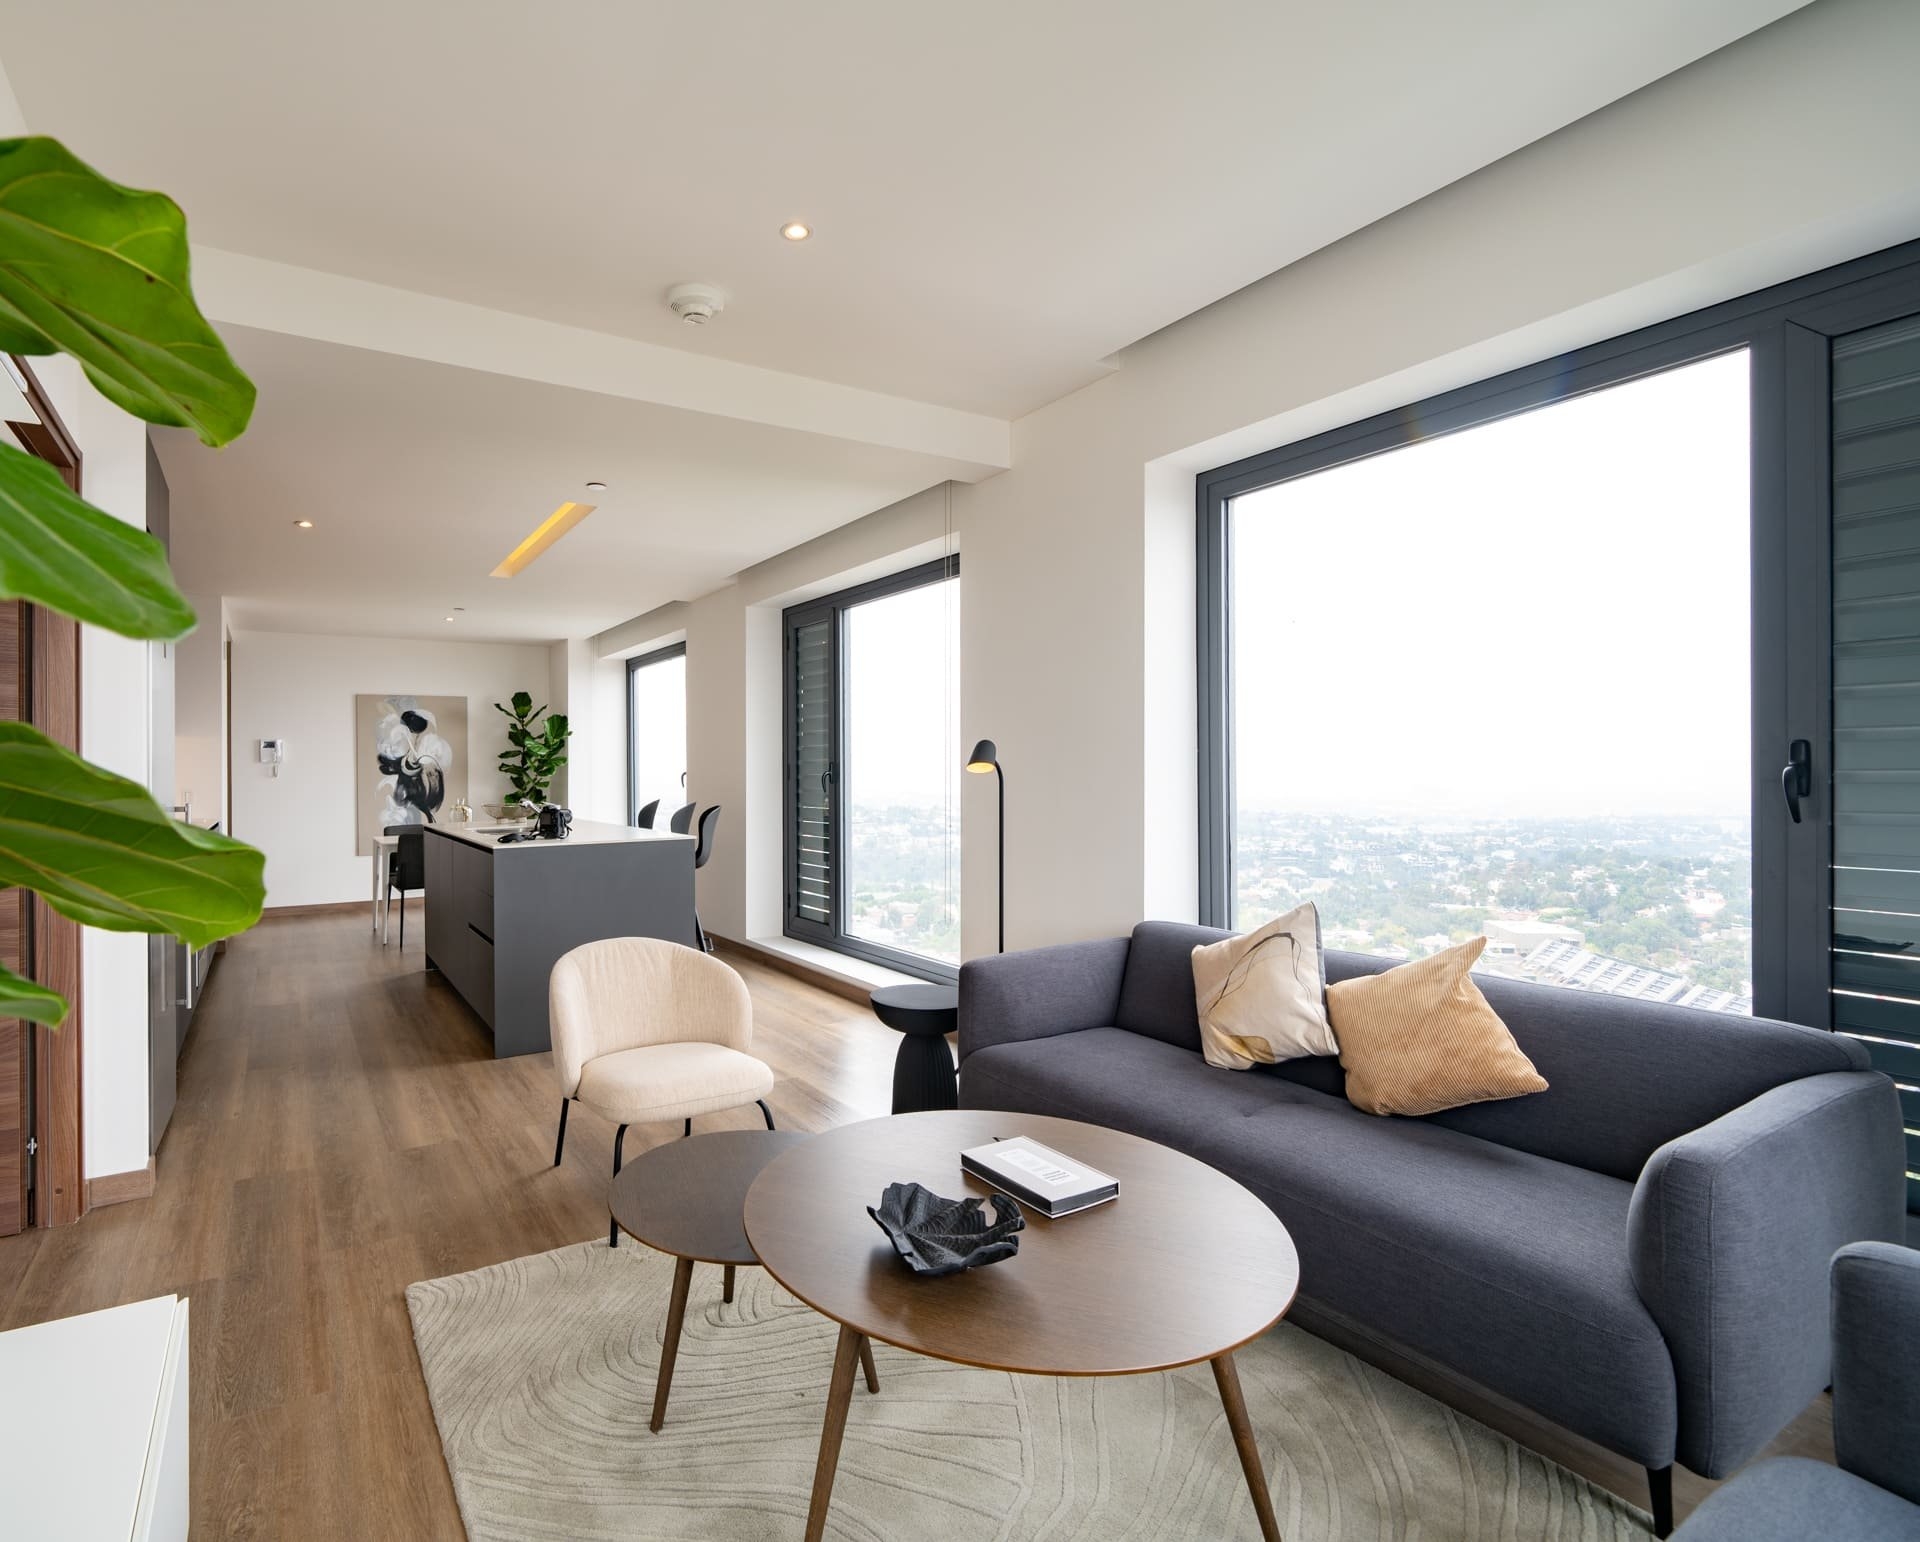 Spacious modern living room with large windows, city view, and open-plan interior design.